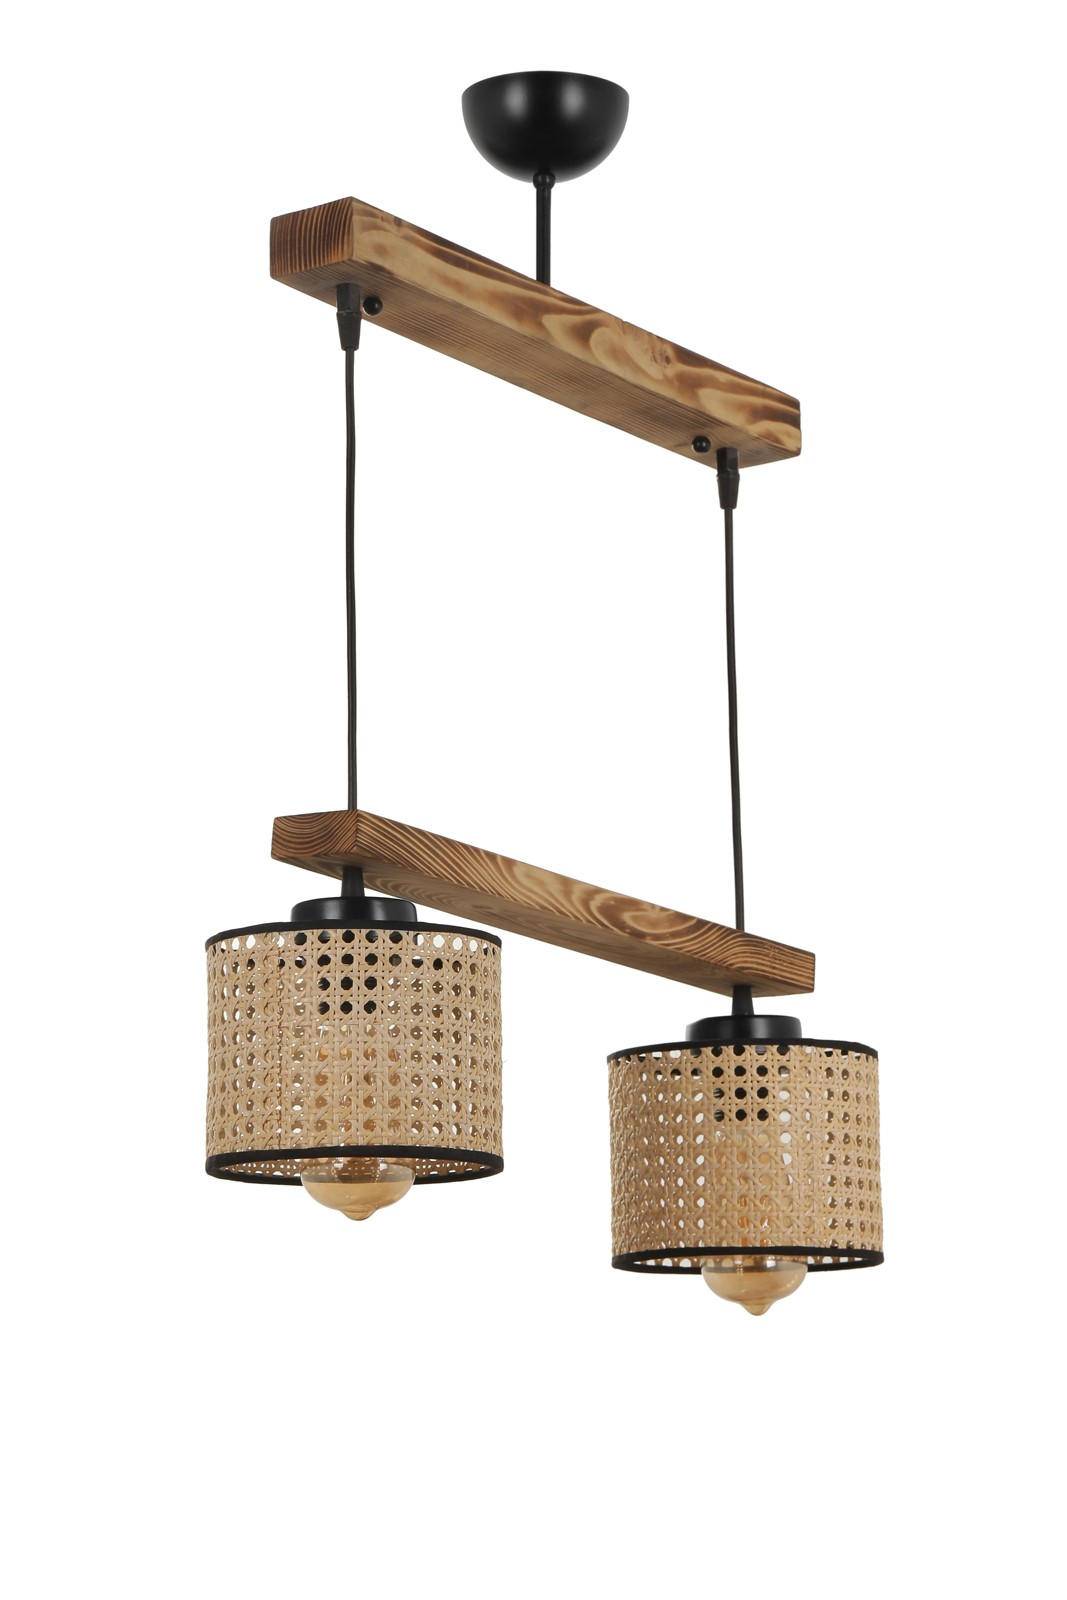 Hanglamp 2 staven 2 kappen Tympaan Hout Caning Bruin Wicker